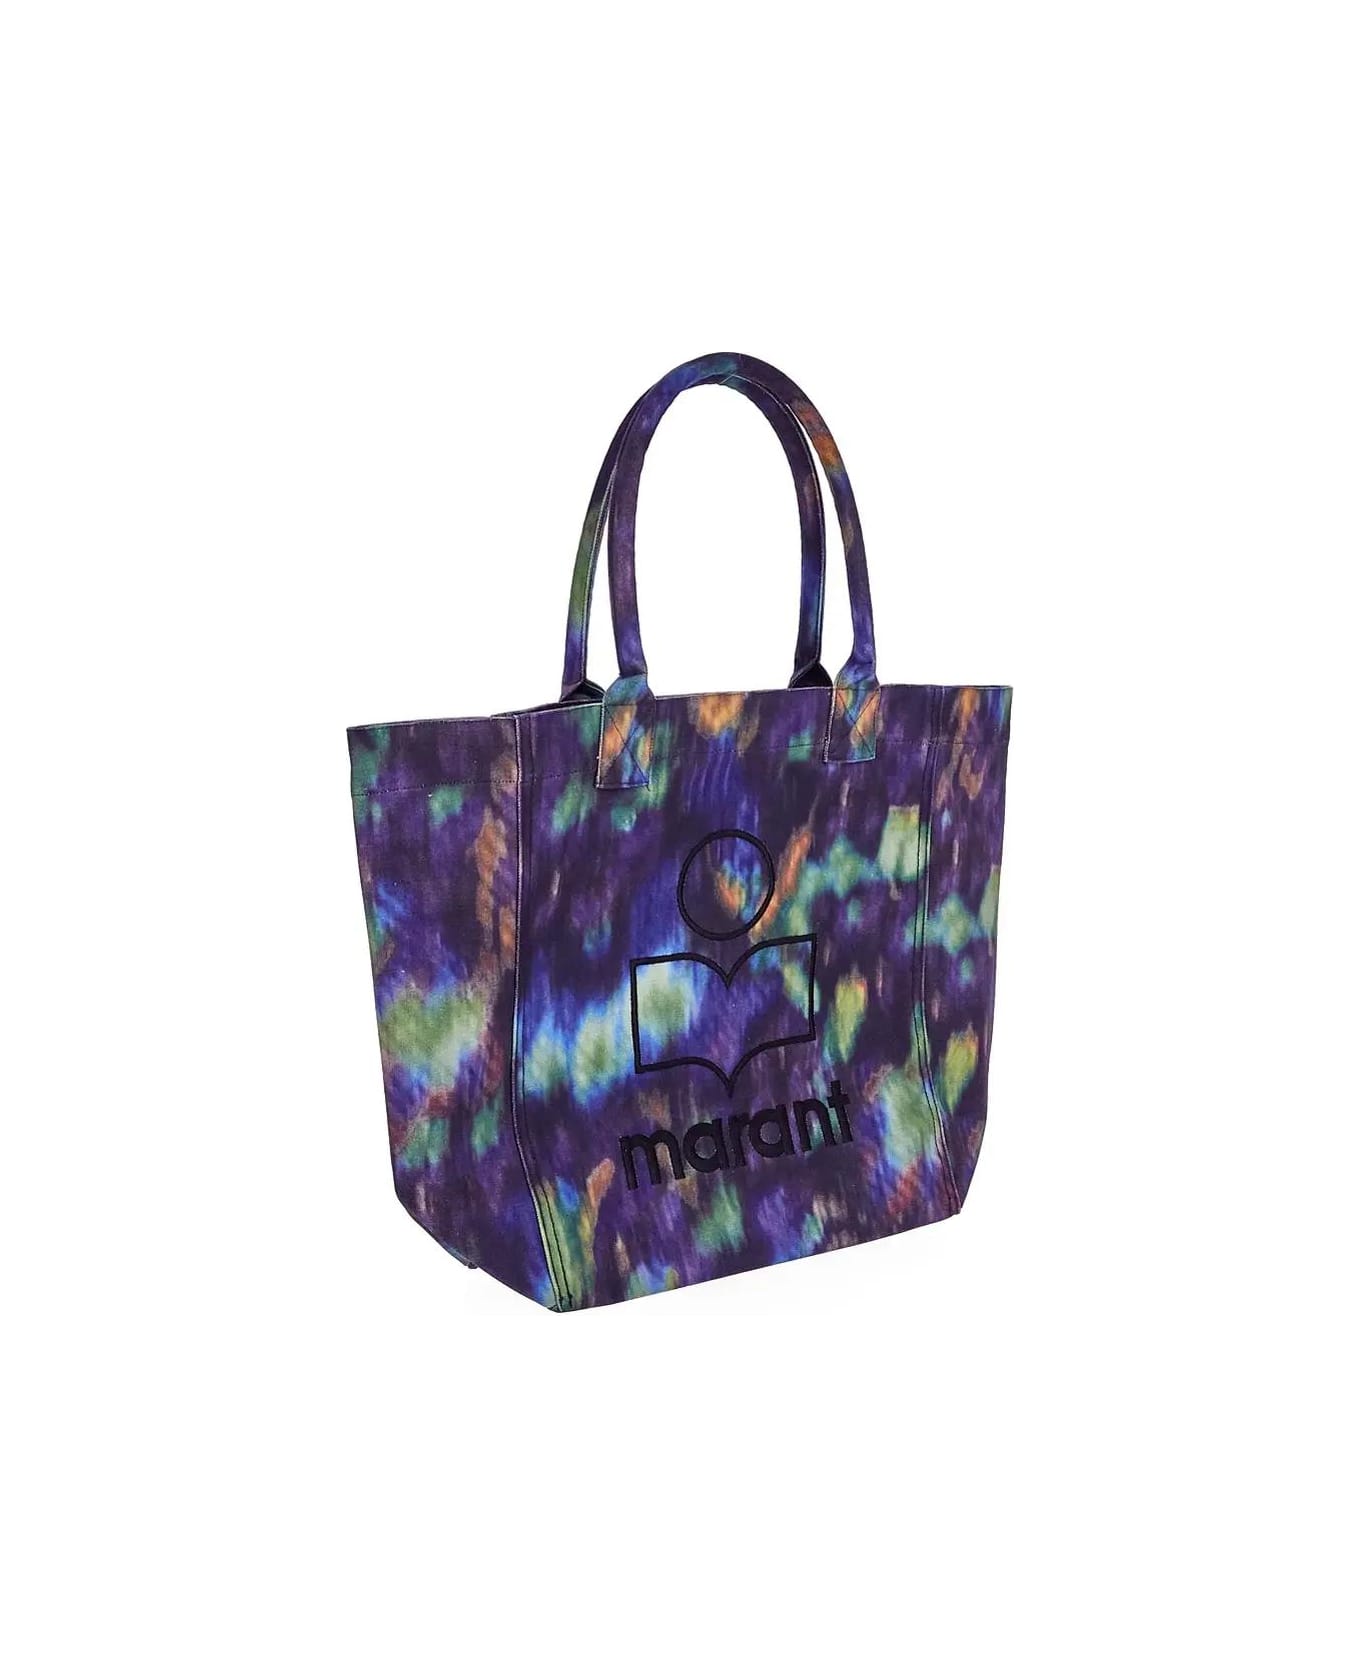 Isabel Marant Yenky Tote Bag - MULTICOLOUR トートバッグ